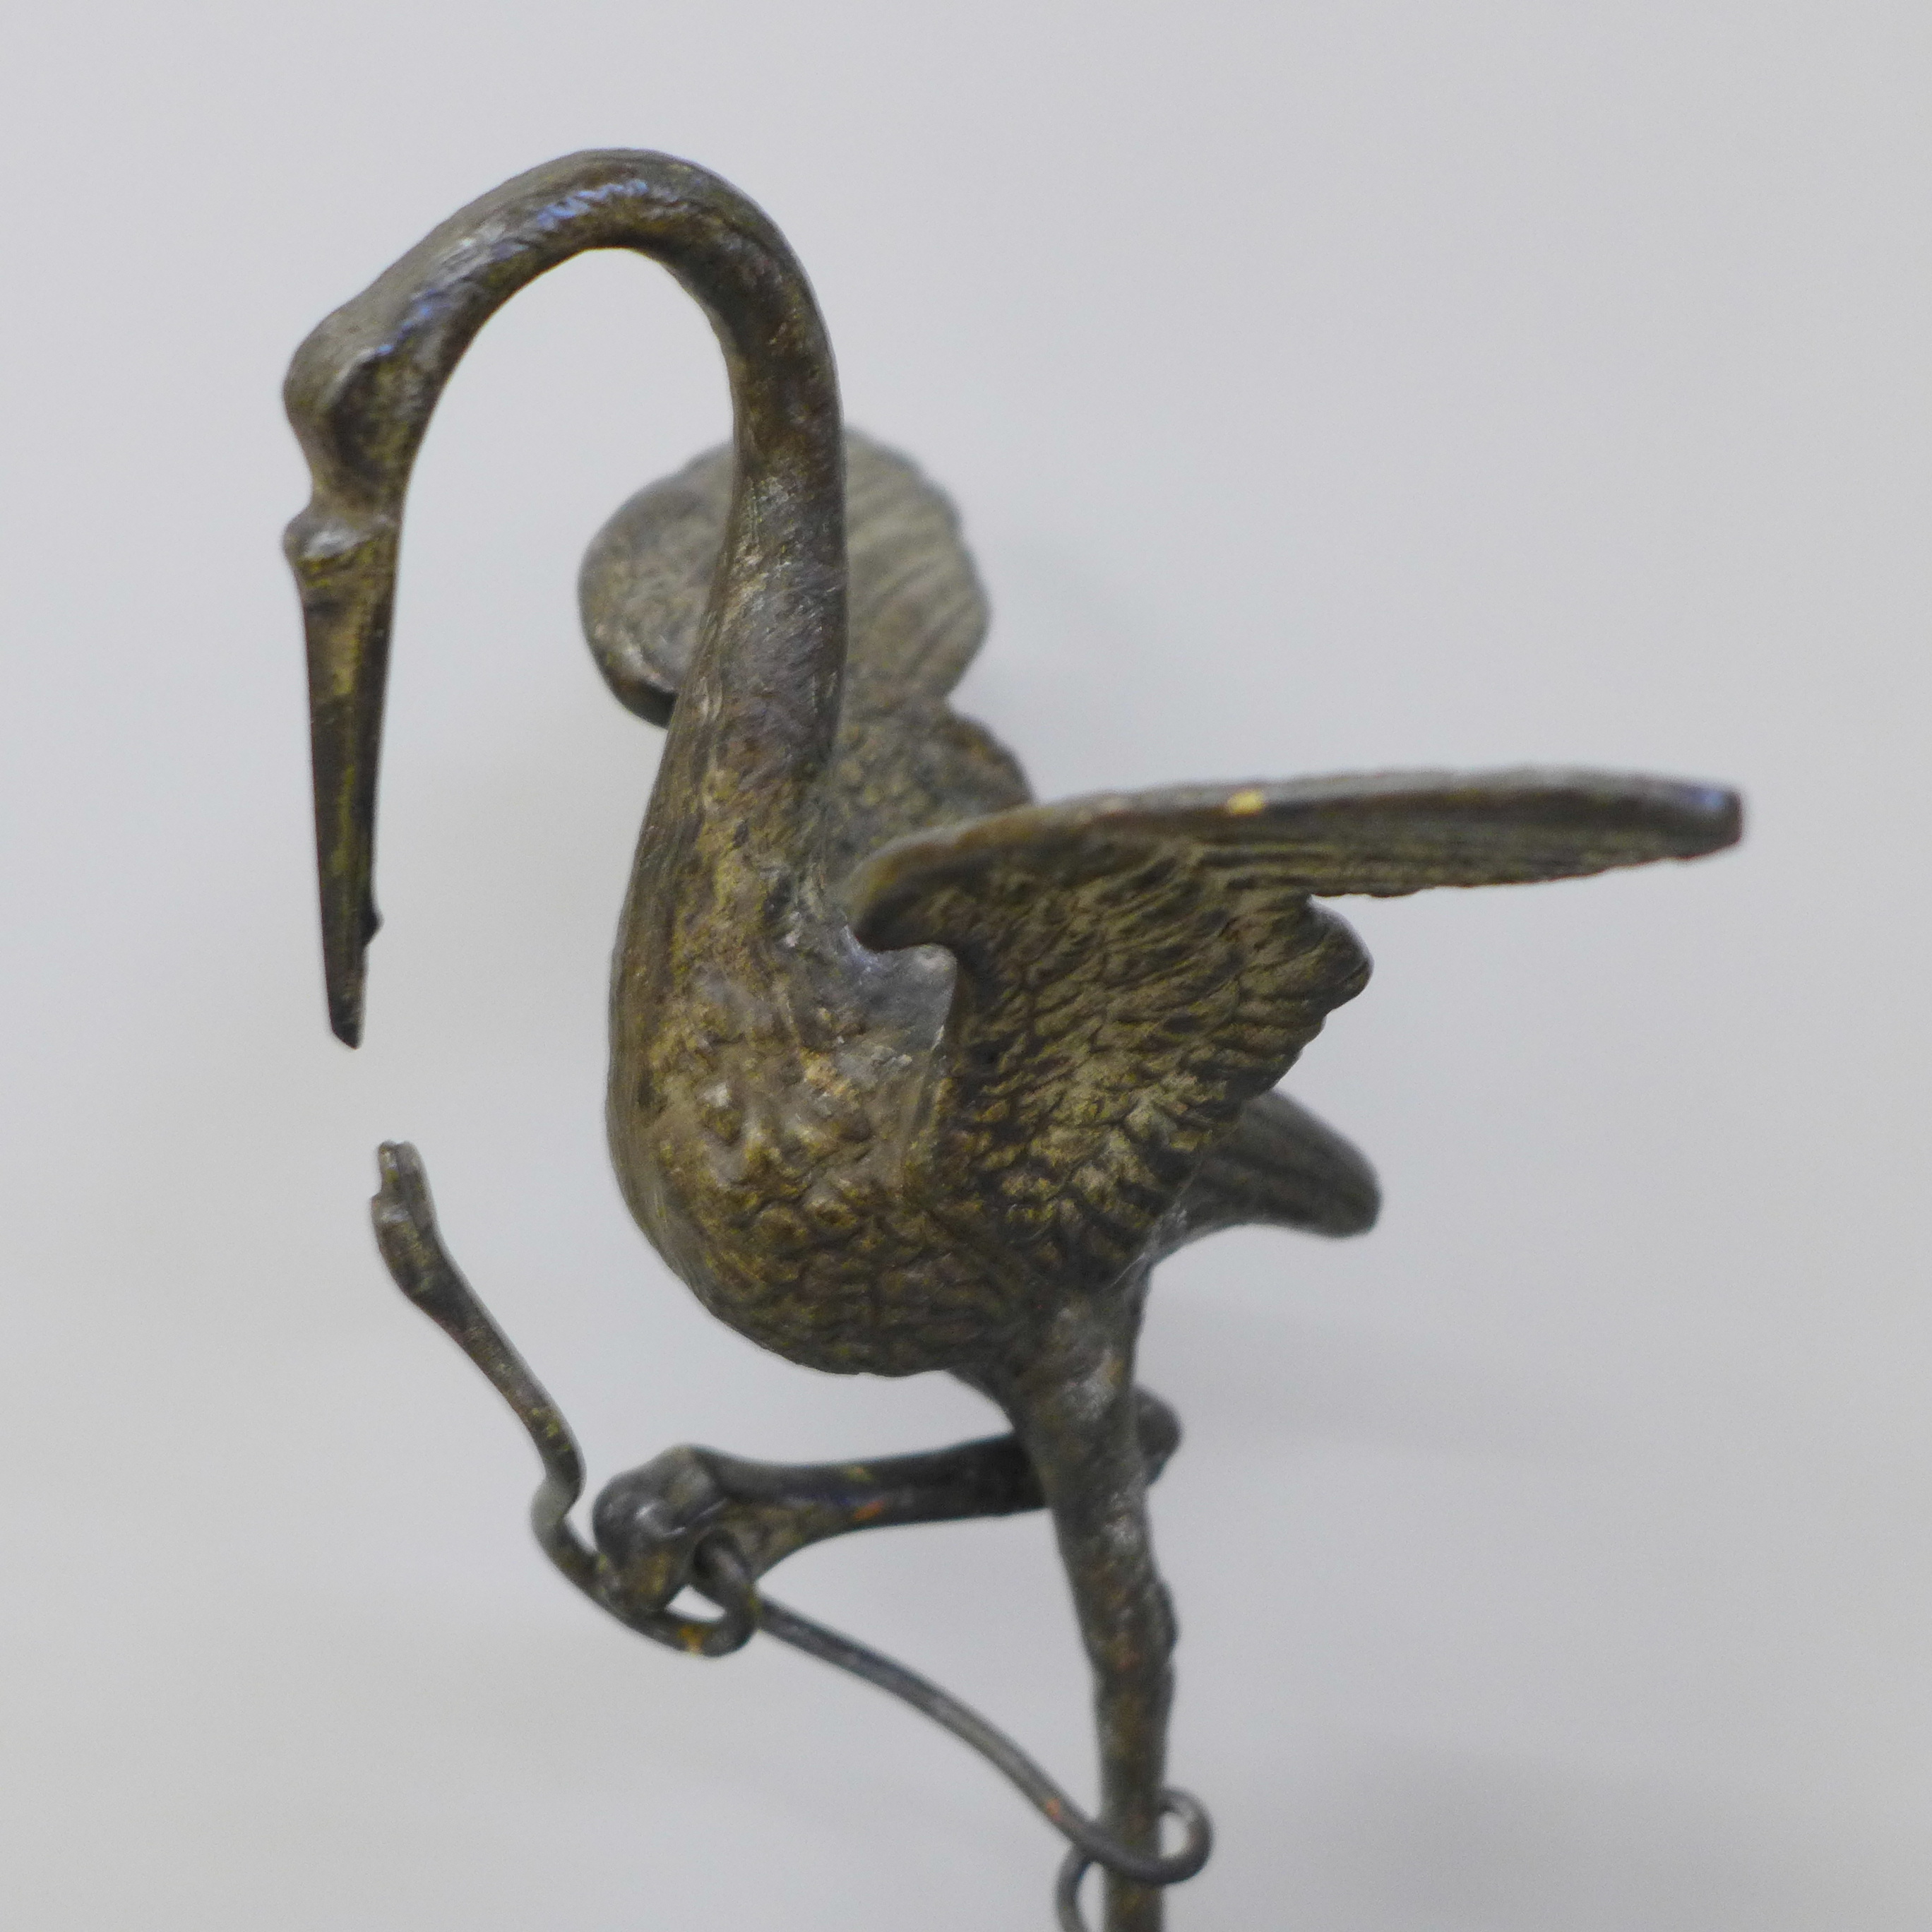 A bronze model of a bird standing on a turtle, on a quartz base - Image 2 of 4